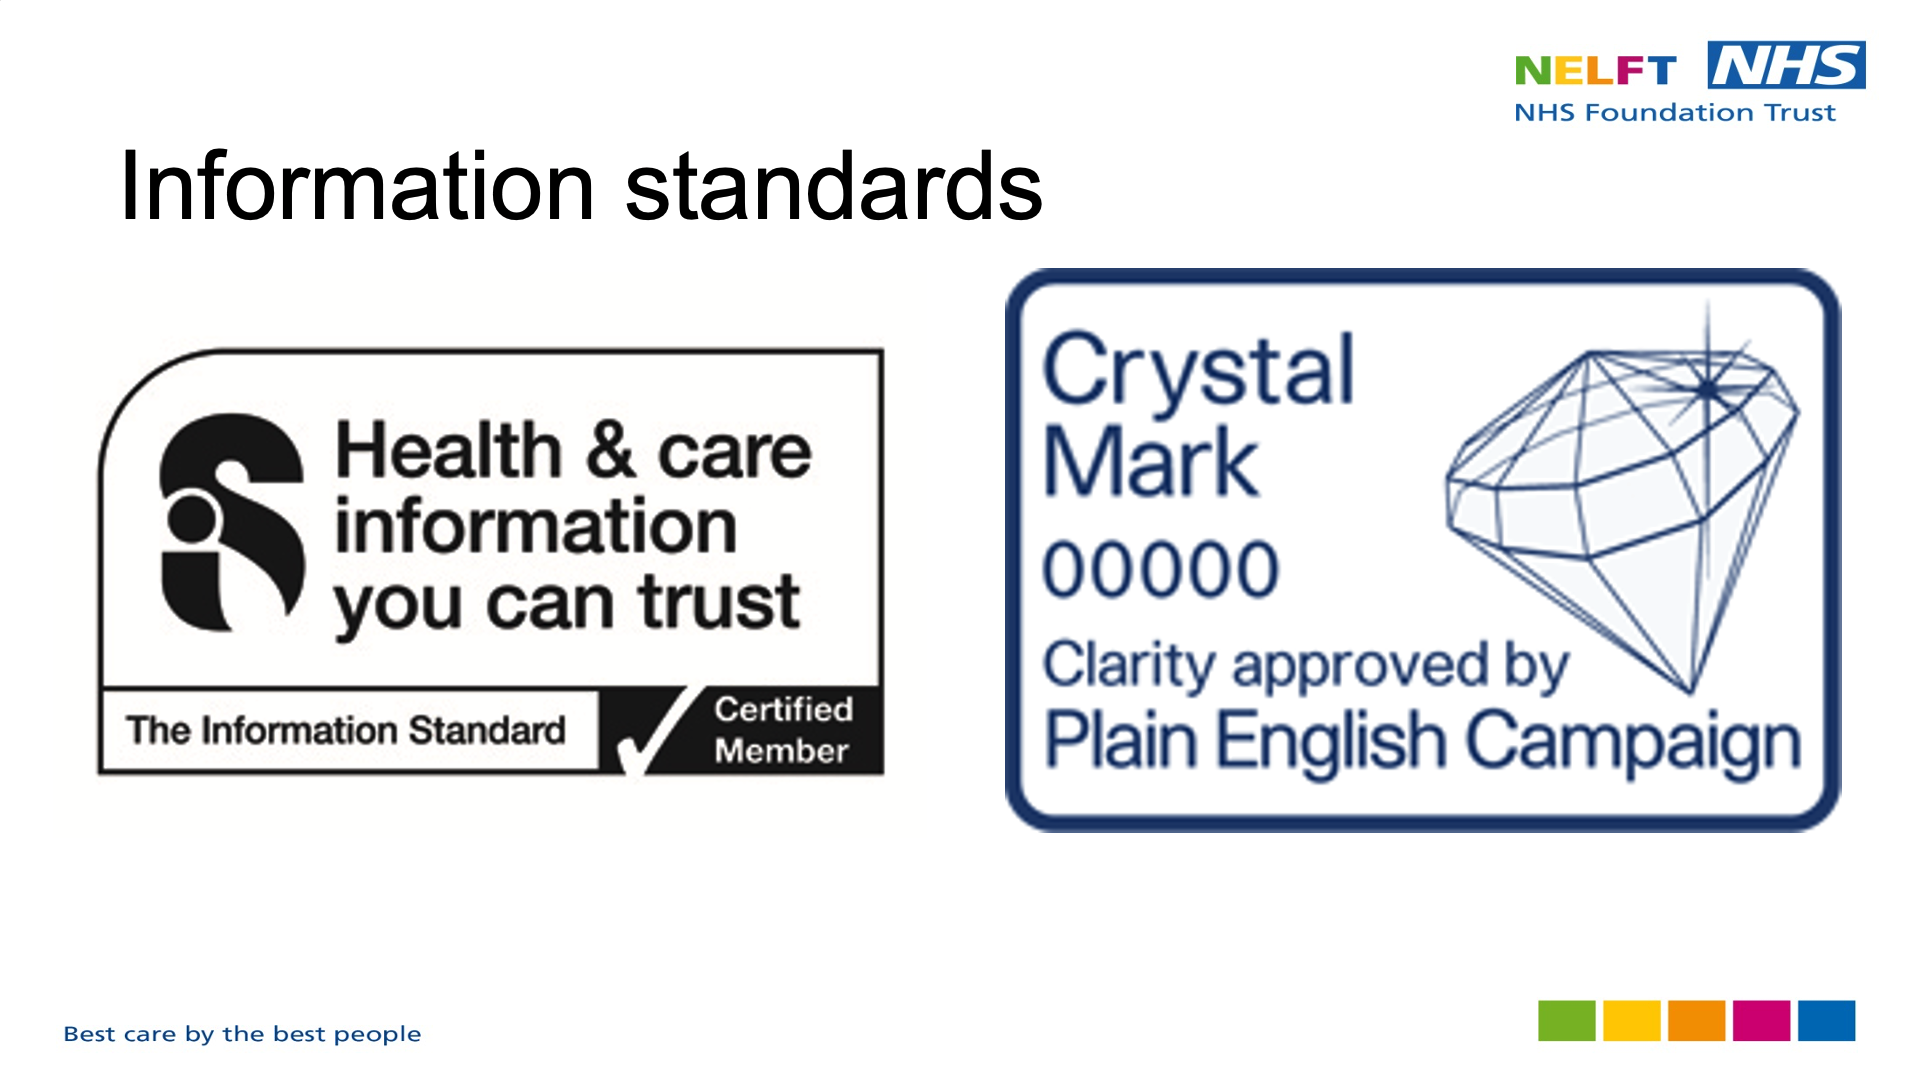 Title: Information standards. Images on page: Information standard check logo, Crystal Mark seal of approval